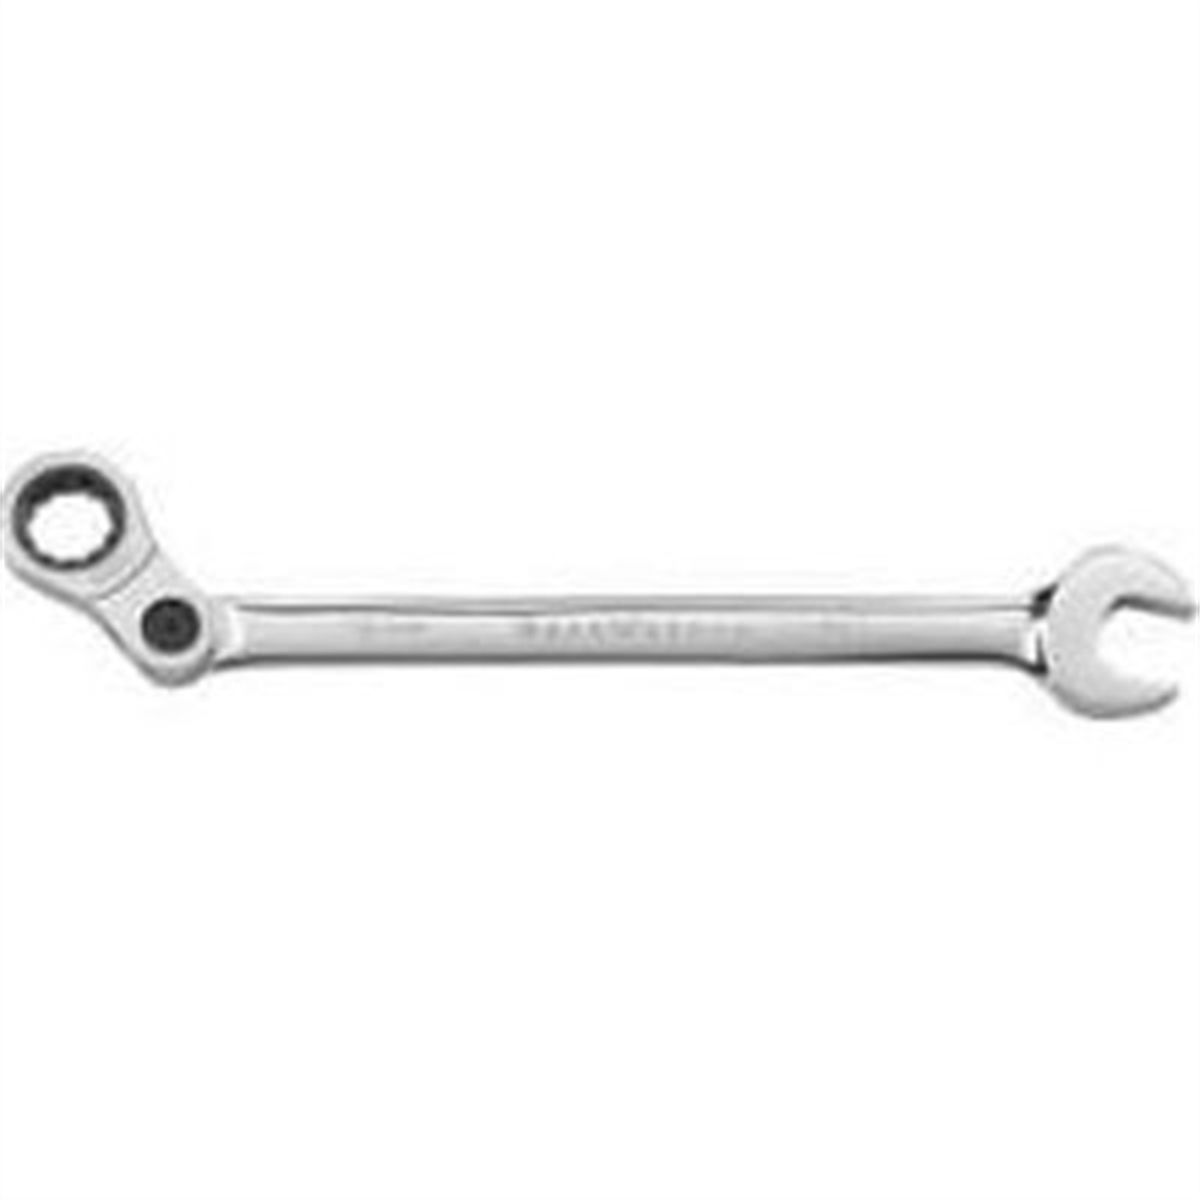 5/16" INDEXING COMBINATION WRENCH